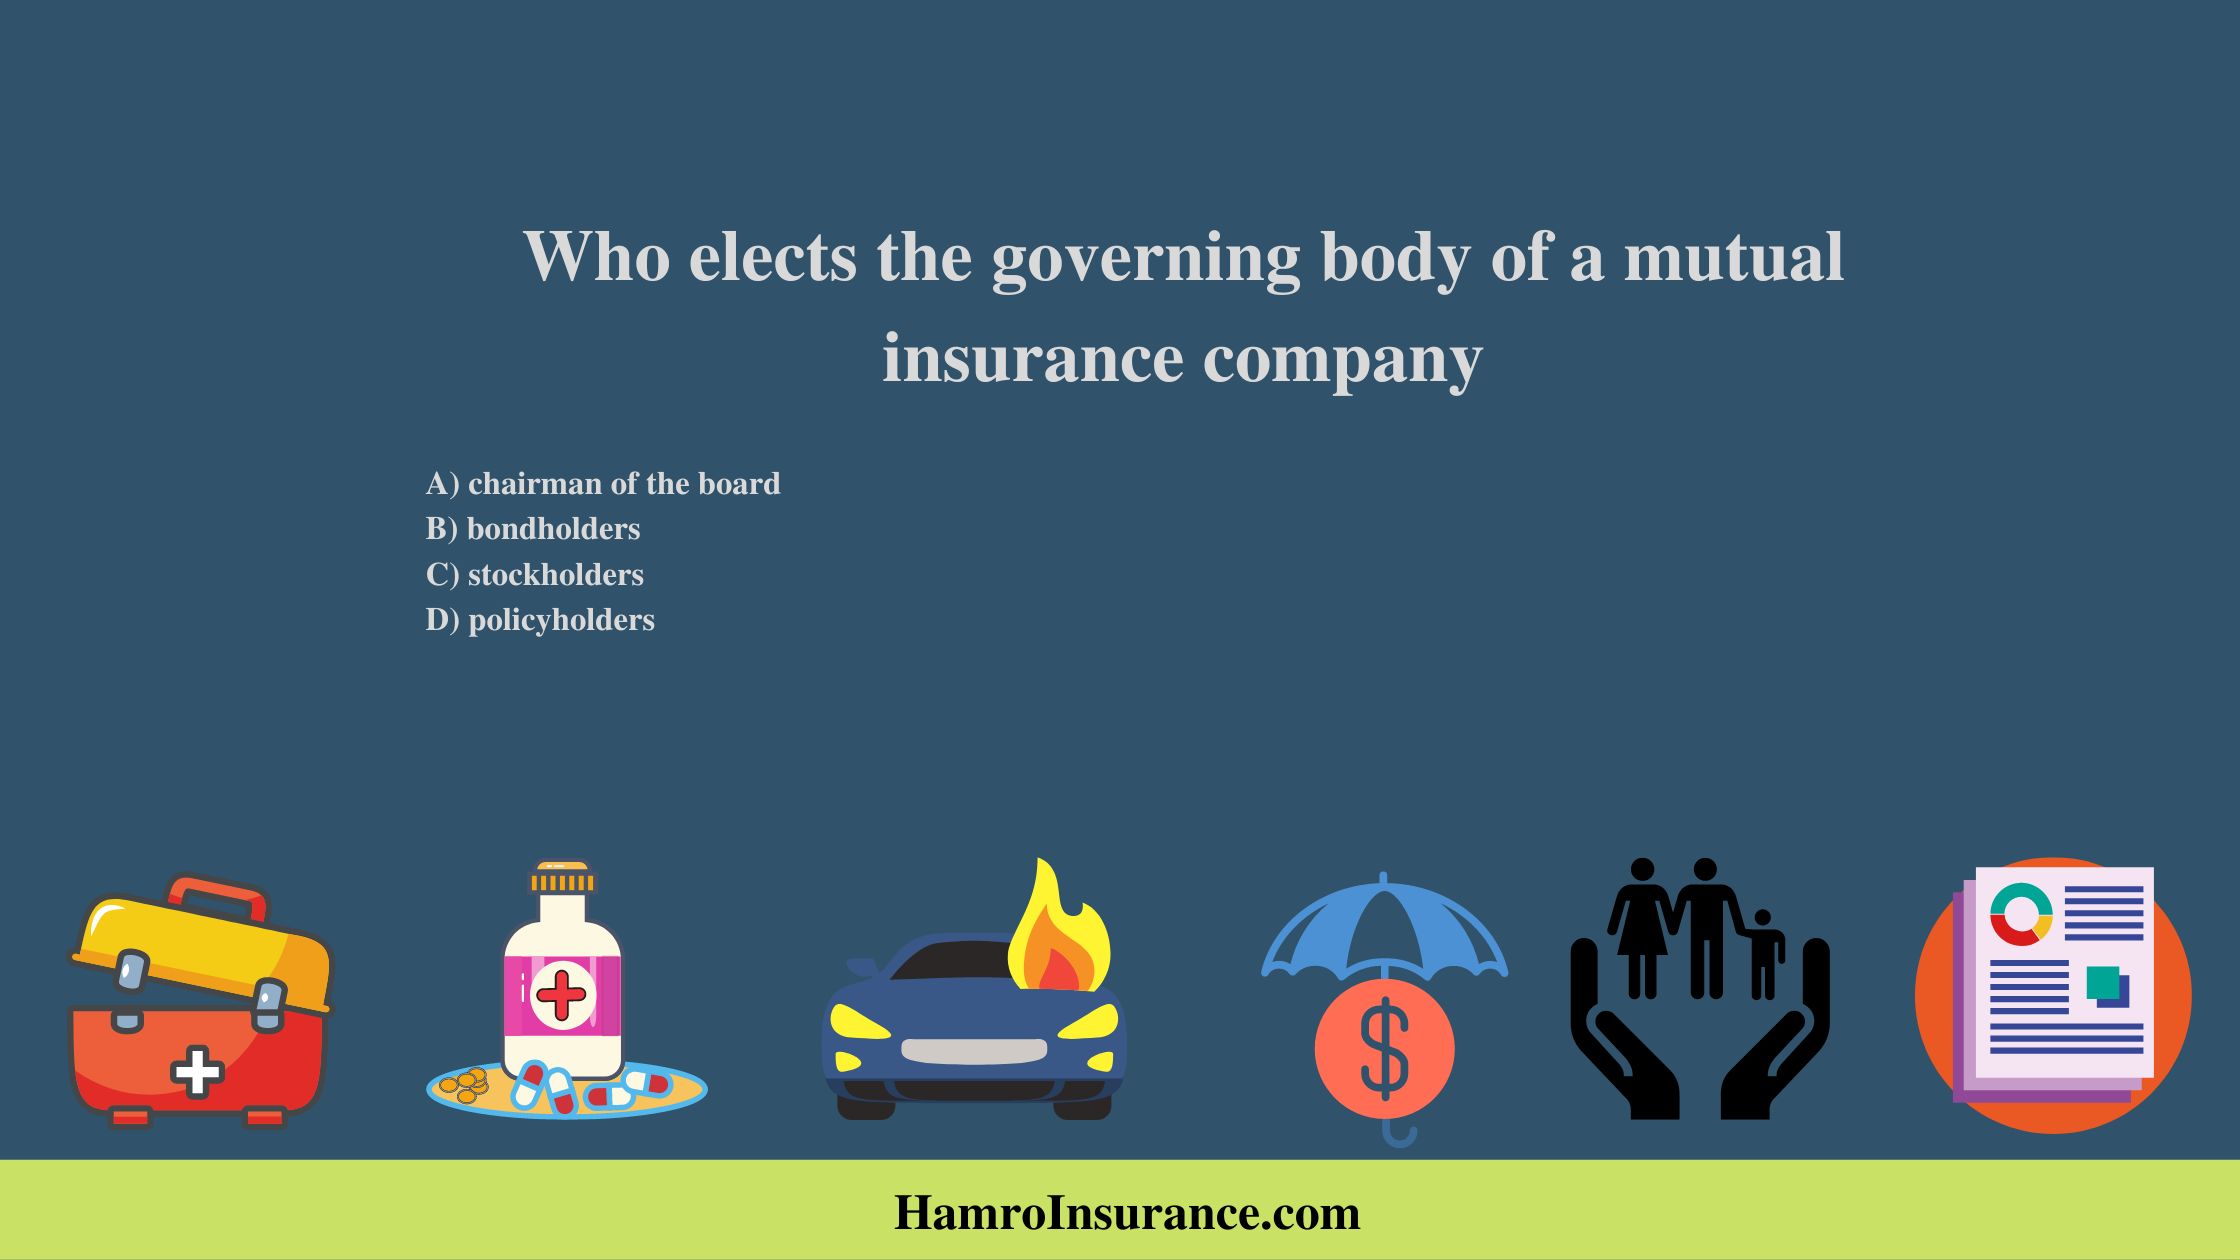 Who elects the governing body of a mutual insurance company